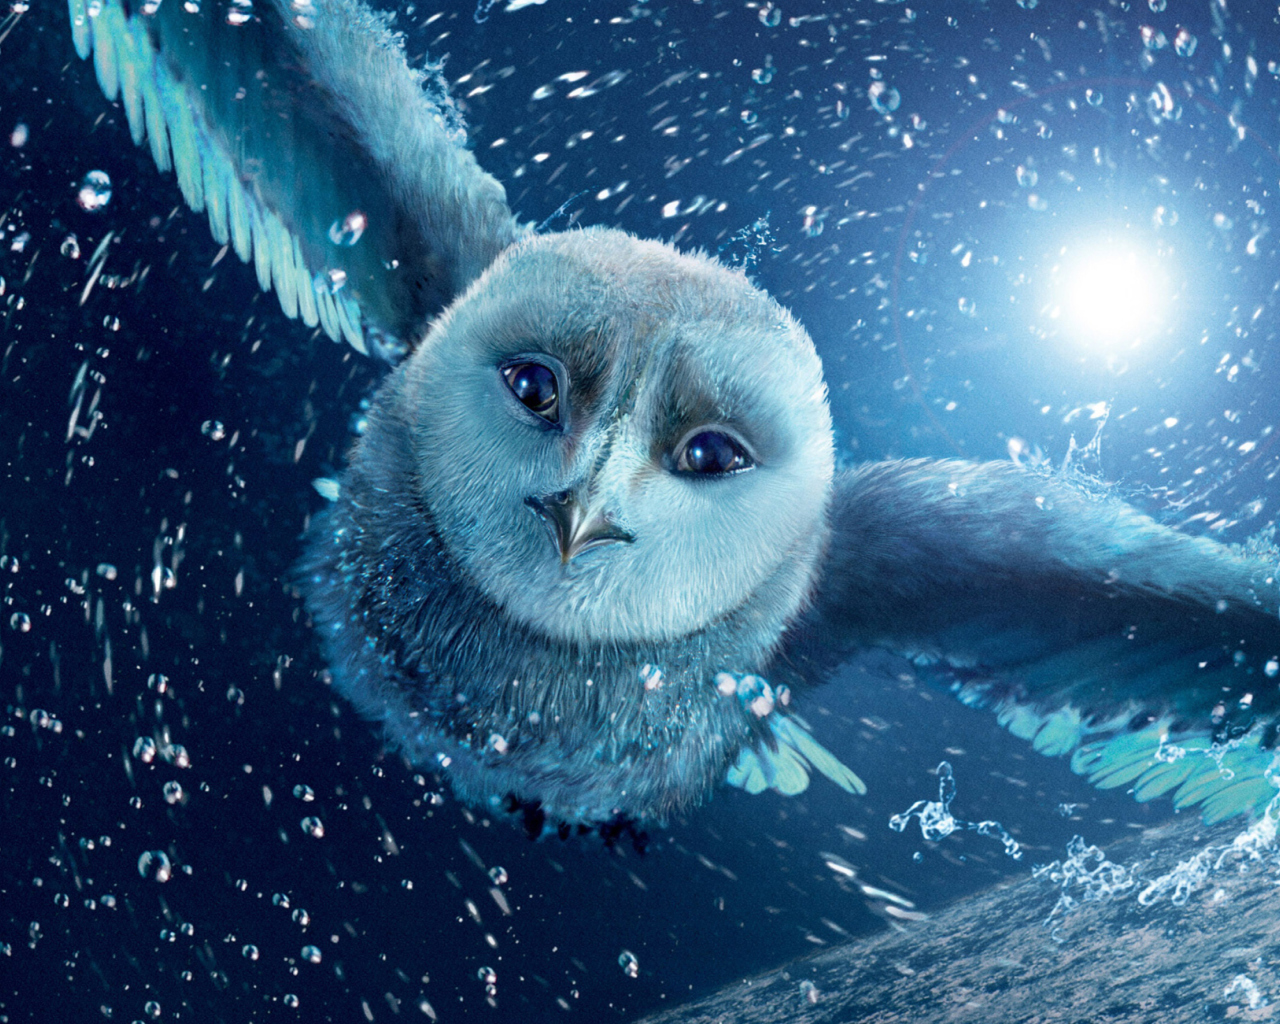 Legend Of The Guardians The Owls Of Ga Hoole wallpaper 1280x1024